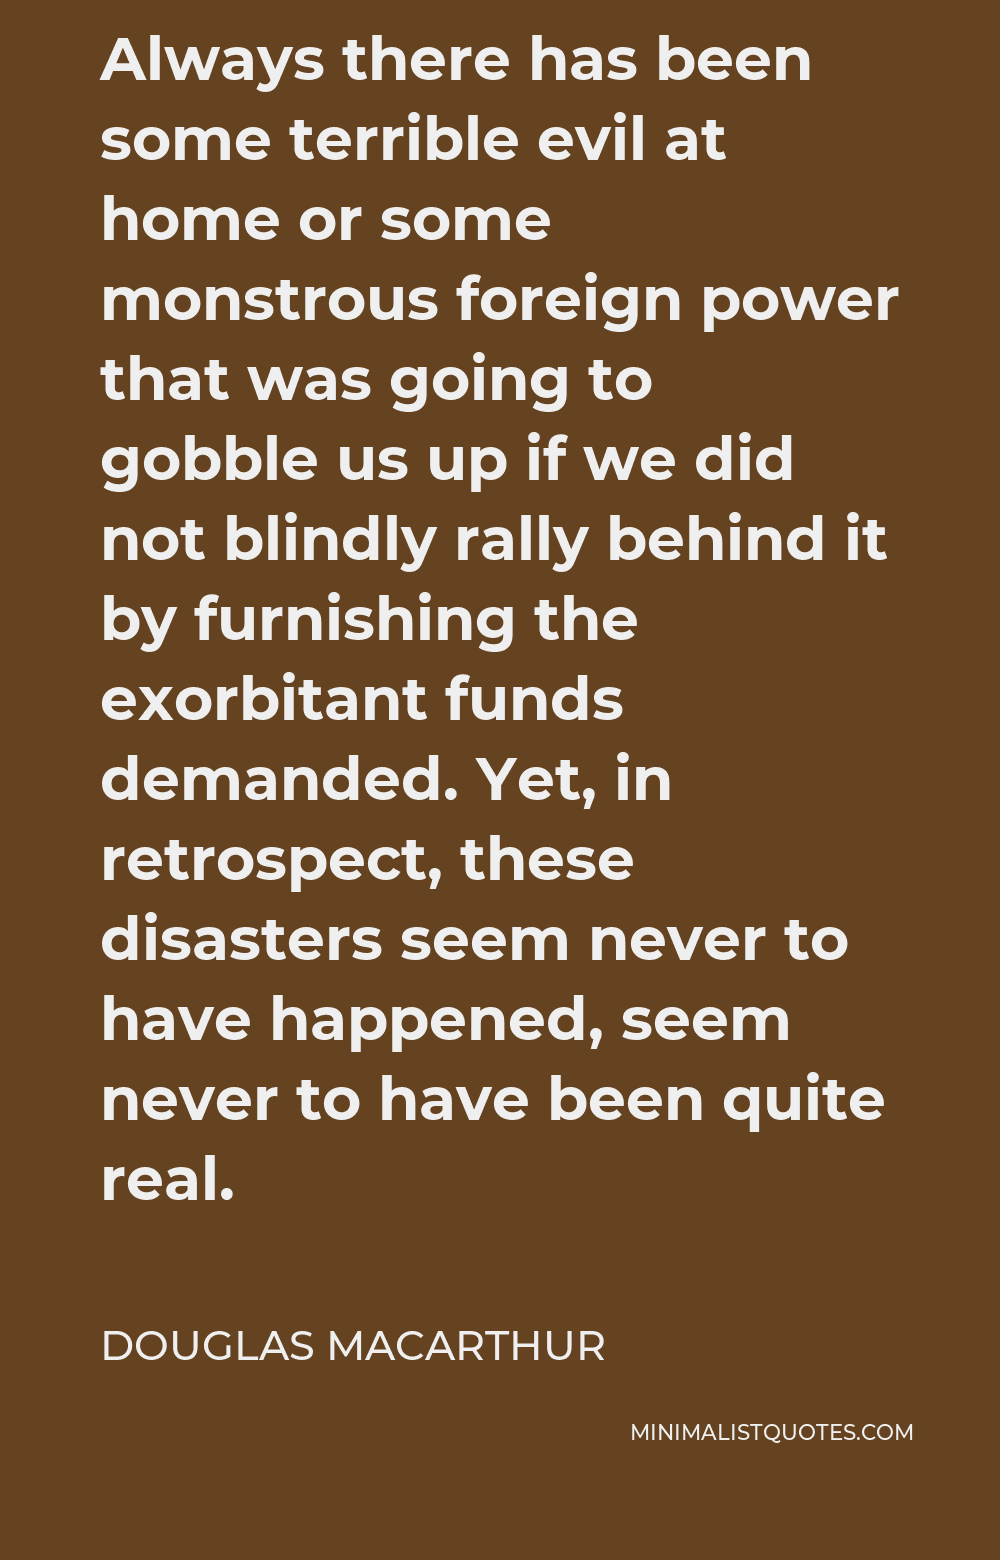 Douglas MacArthur Quote - Always there has been some terrible evil at home or some monstrous foreign power that was going to gobble us up if we did not blindly rally behind it by furnishing the exorbitant funds demanded. Yet, in retrospect, these disasters seem never to have happened, seem never to have been quite real.